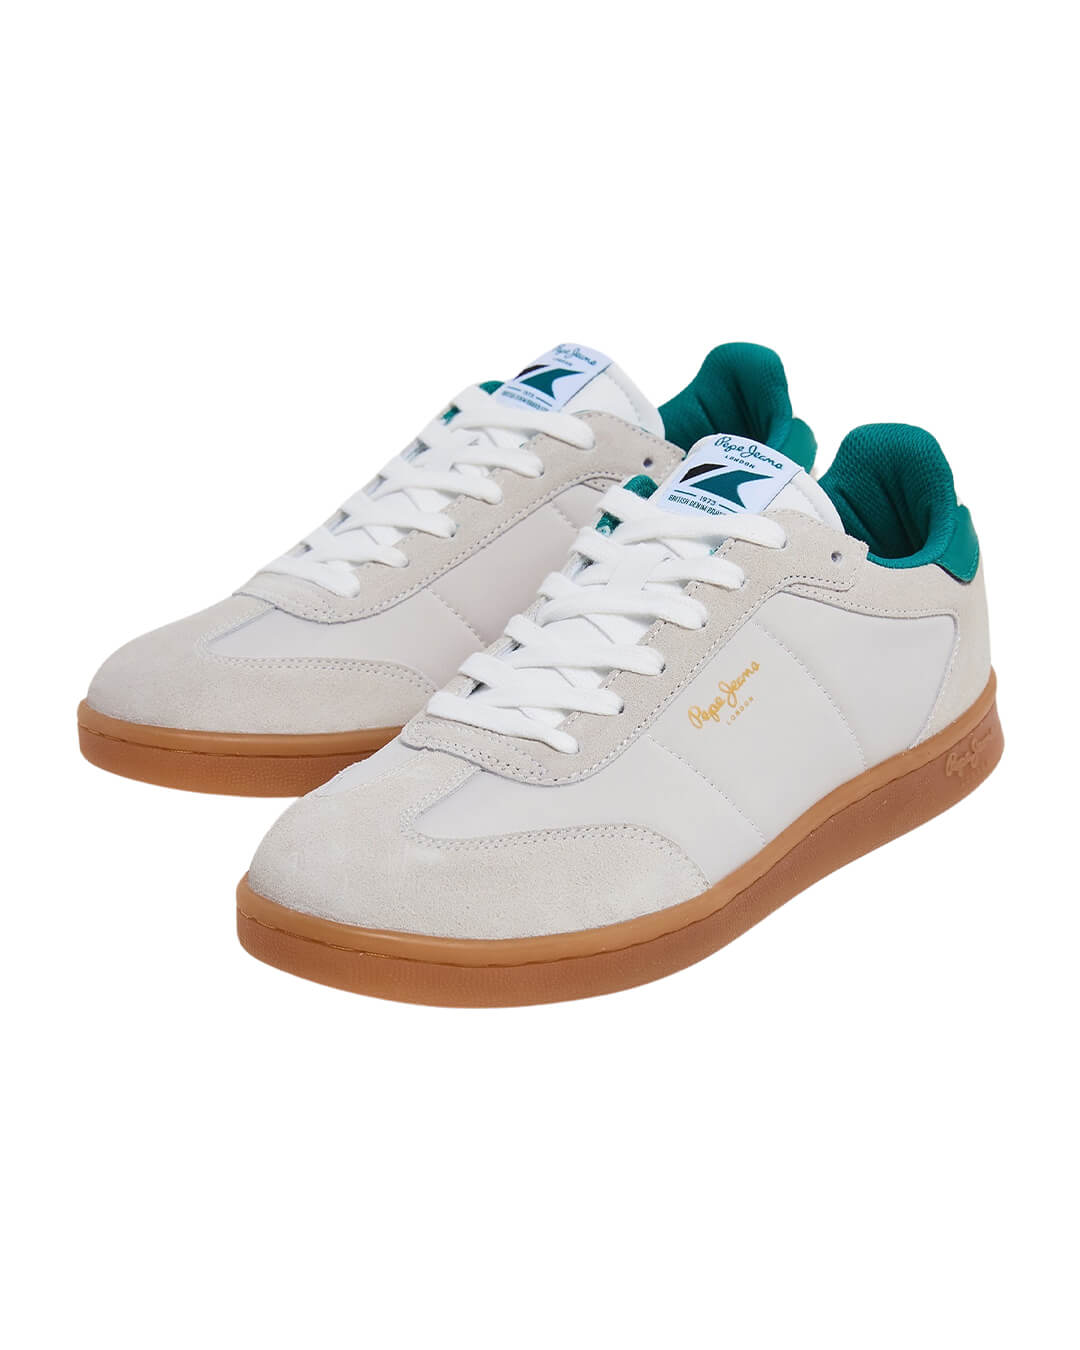 Pepe Jeans Shoes Pepe Jeans Beige Combined Classic Trainers